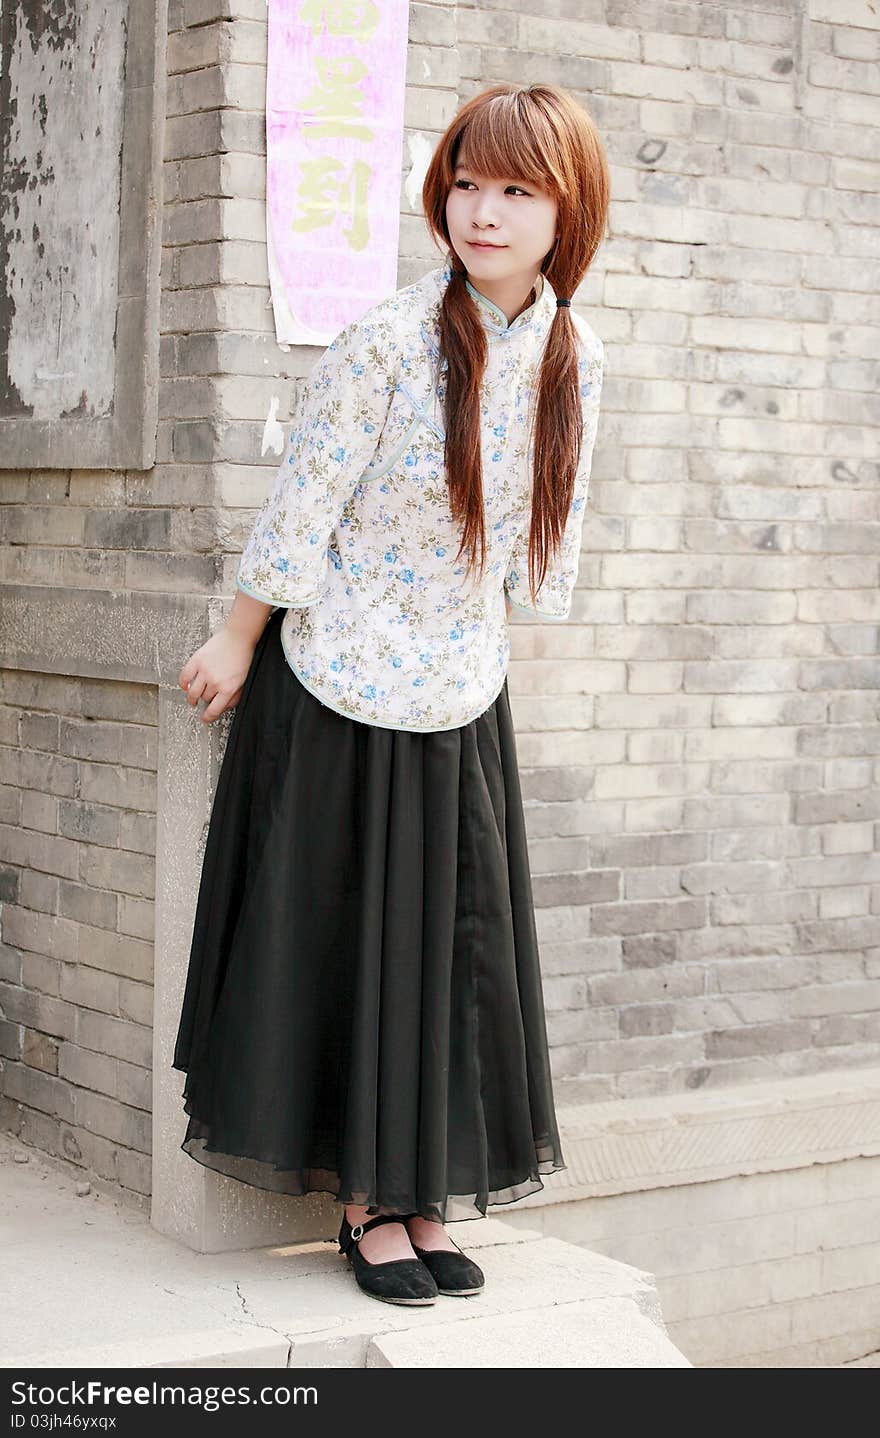 Chinese girl in traditional dress outdoor . Chinese characters on couplet is luck come. Chinese girl in traditional dress outdoor . Chinese characters on couplet is luck come.